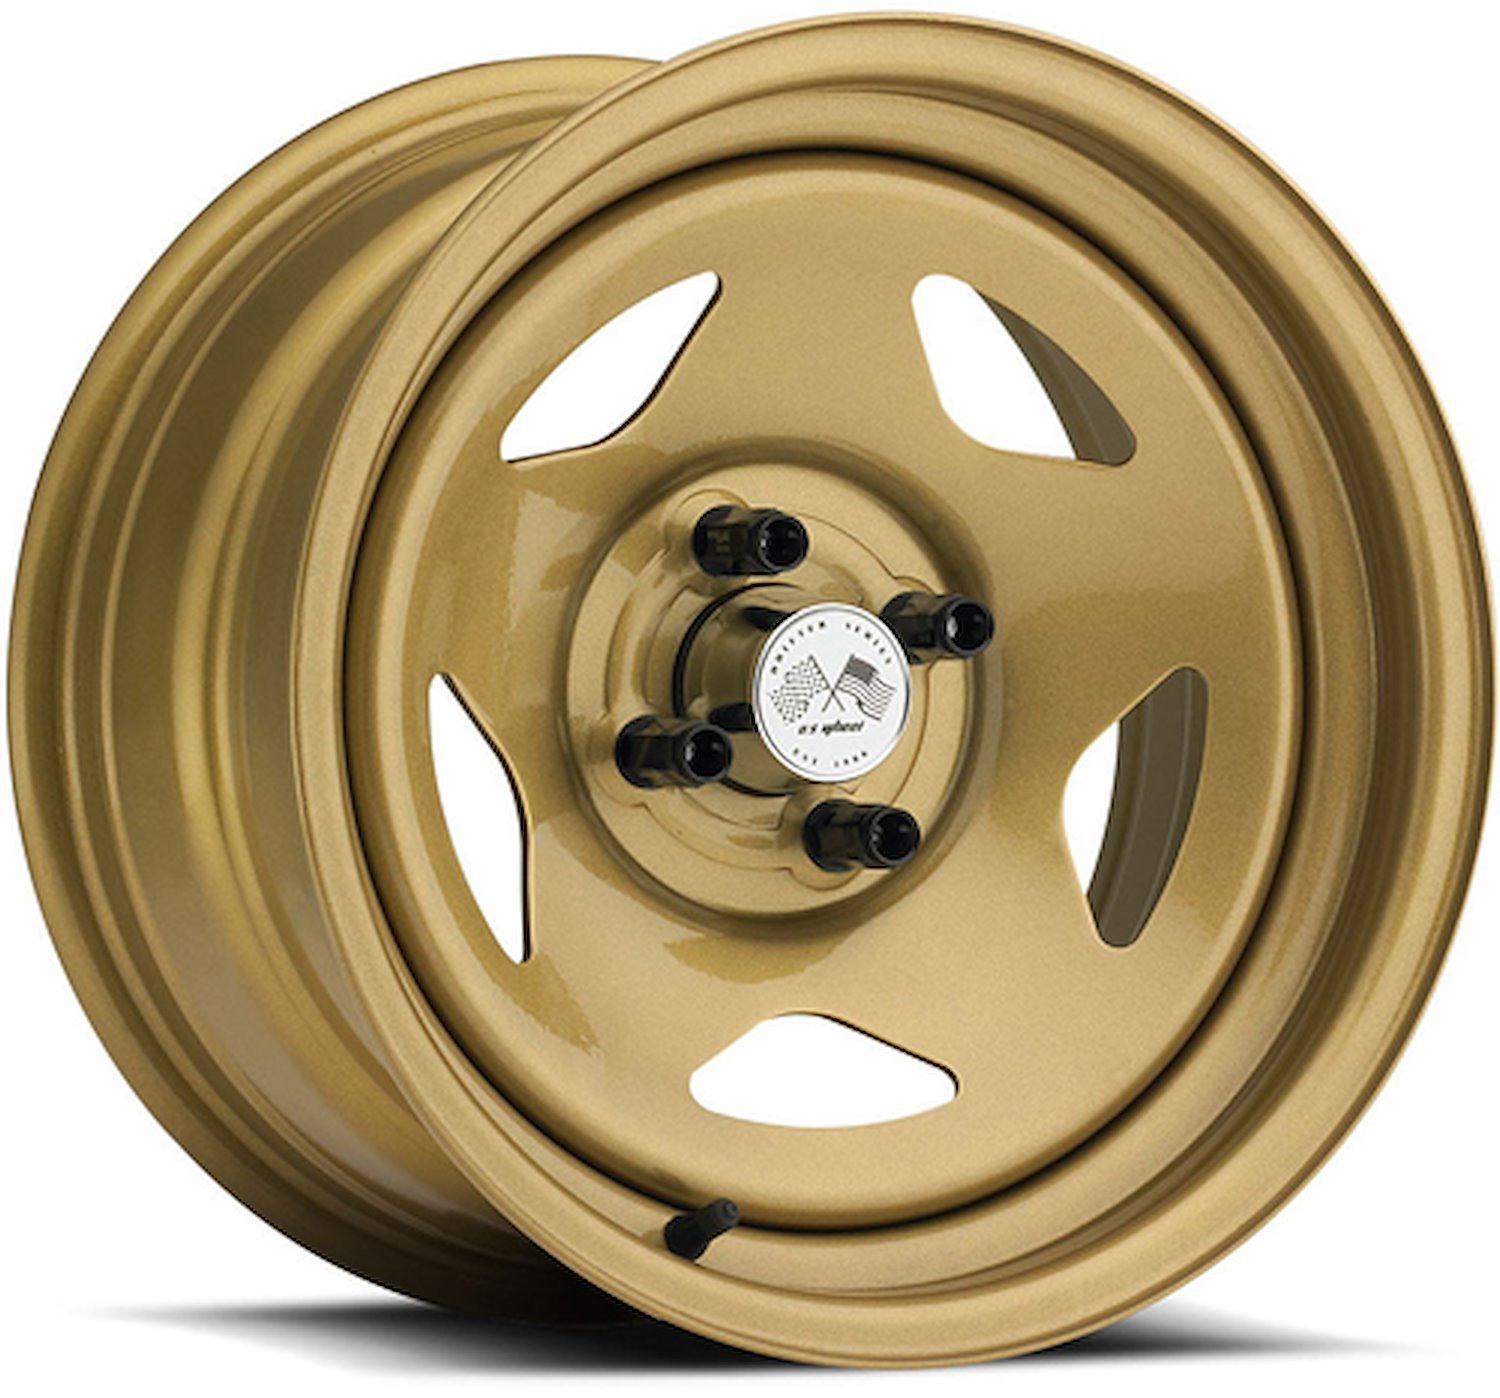 PAINTED STAR FWD DRIFTER GOLD 15 x 8 4 x 45 Bolt Circle 45 Back Spacing 0 offset 266 Center Bore 1400 lbs Load Rating